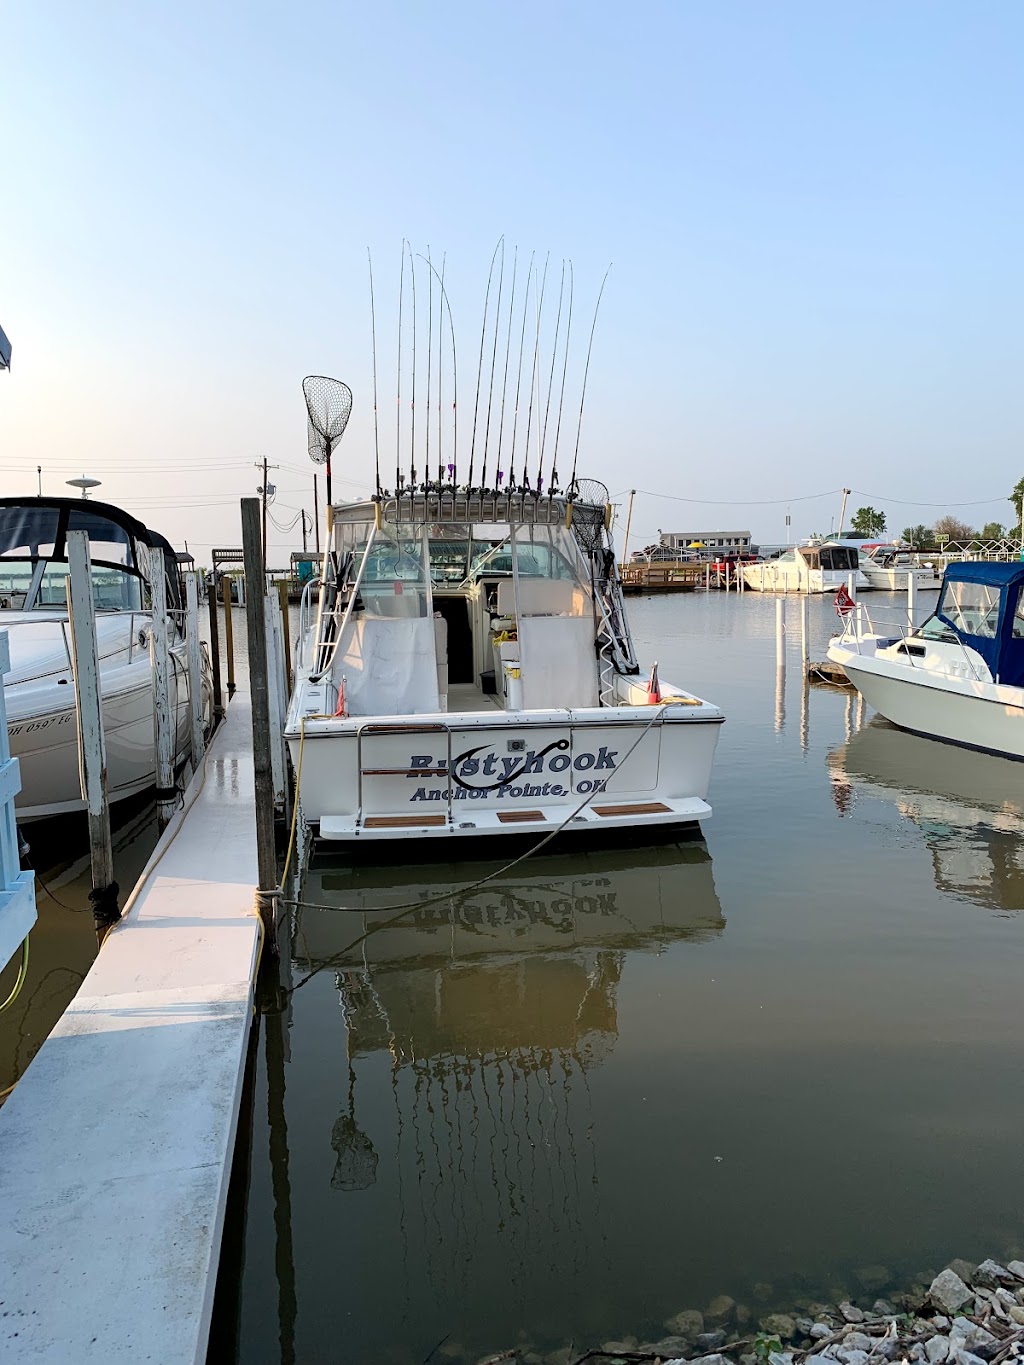 Anchor Pointe Marina | 900 Anchor Point Rd, Curtice, OH 43412 | Phone: (419) 836-2455